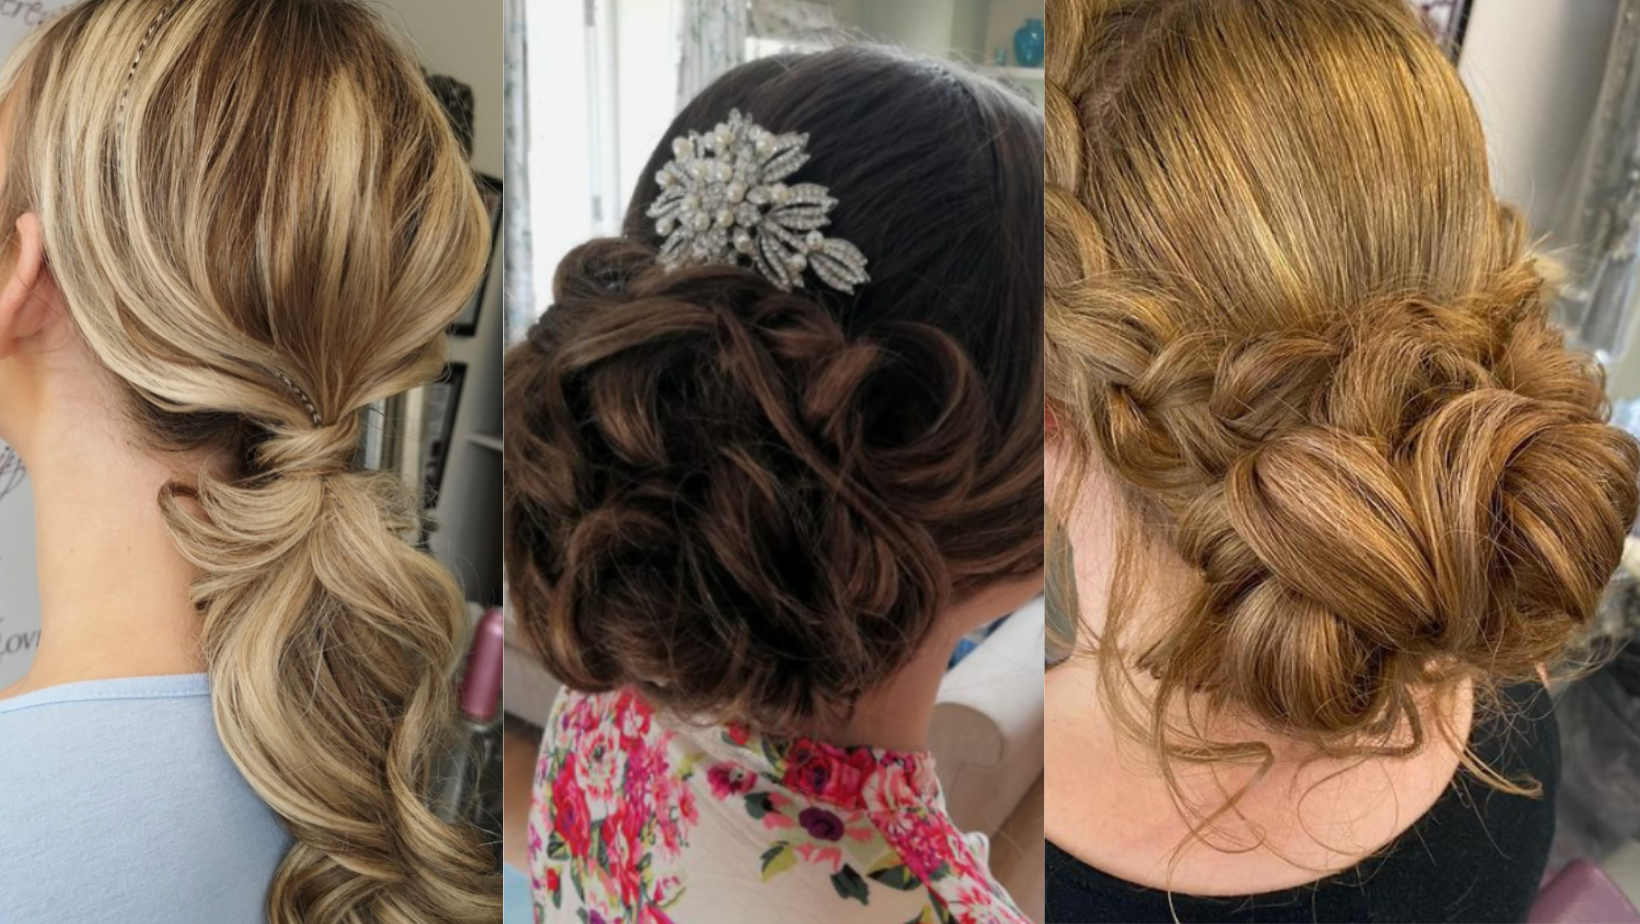 Classy Up-Do’s for your Special Occasions